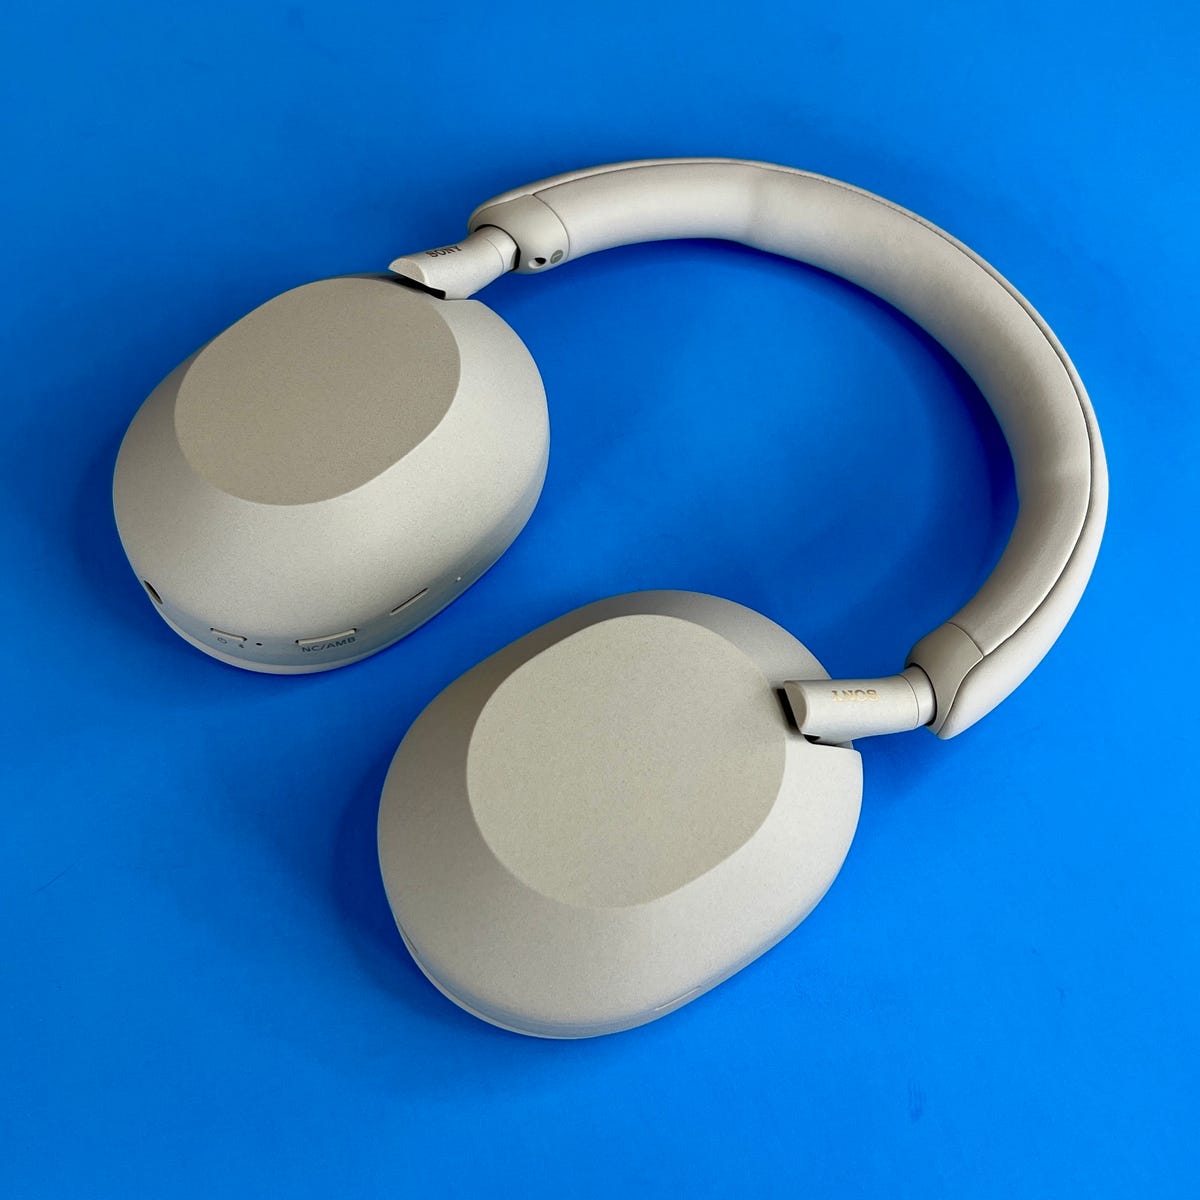 Sony WH-1000XM5 Headphones One to Beat - CNET